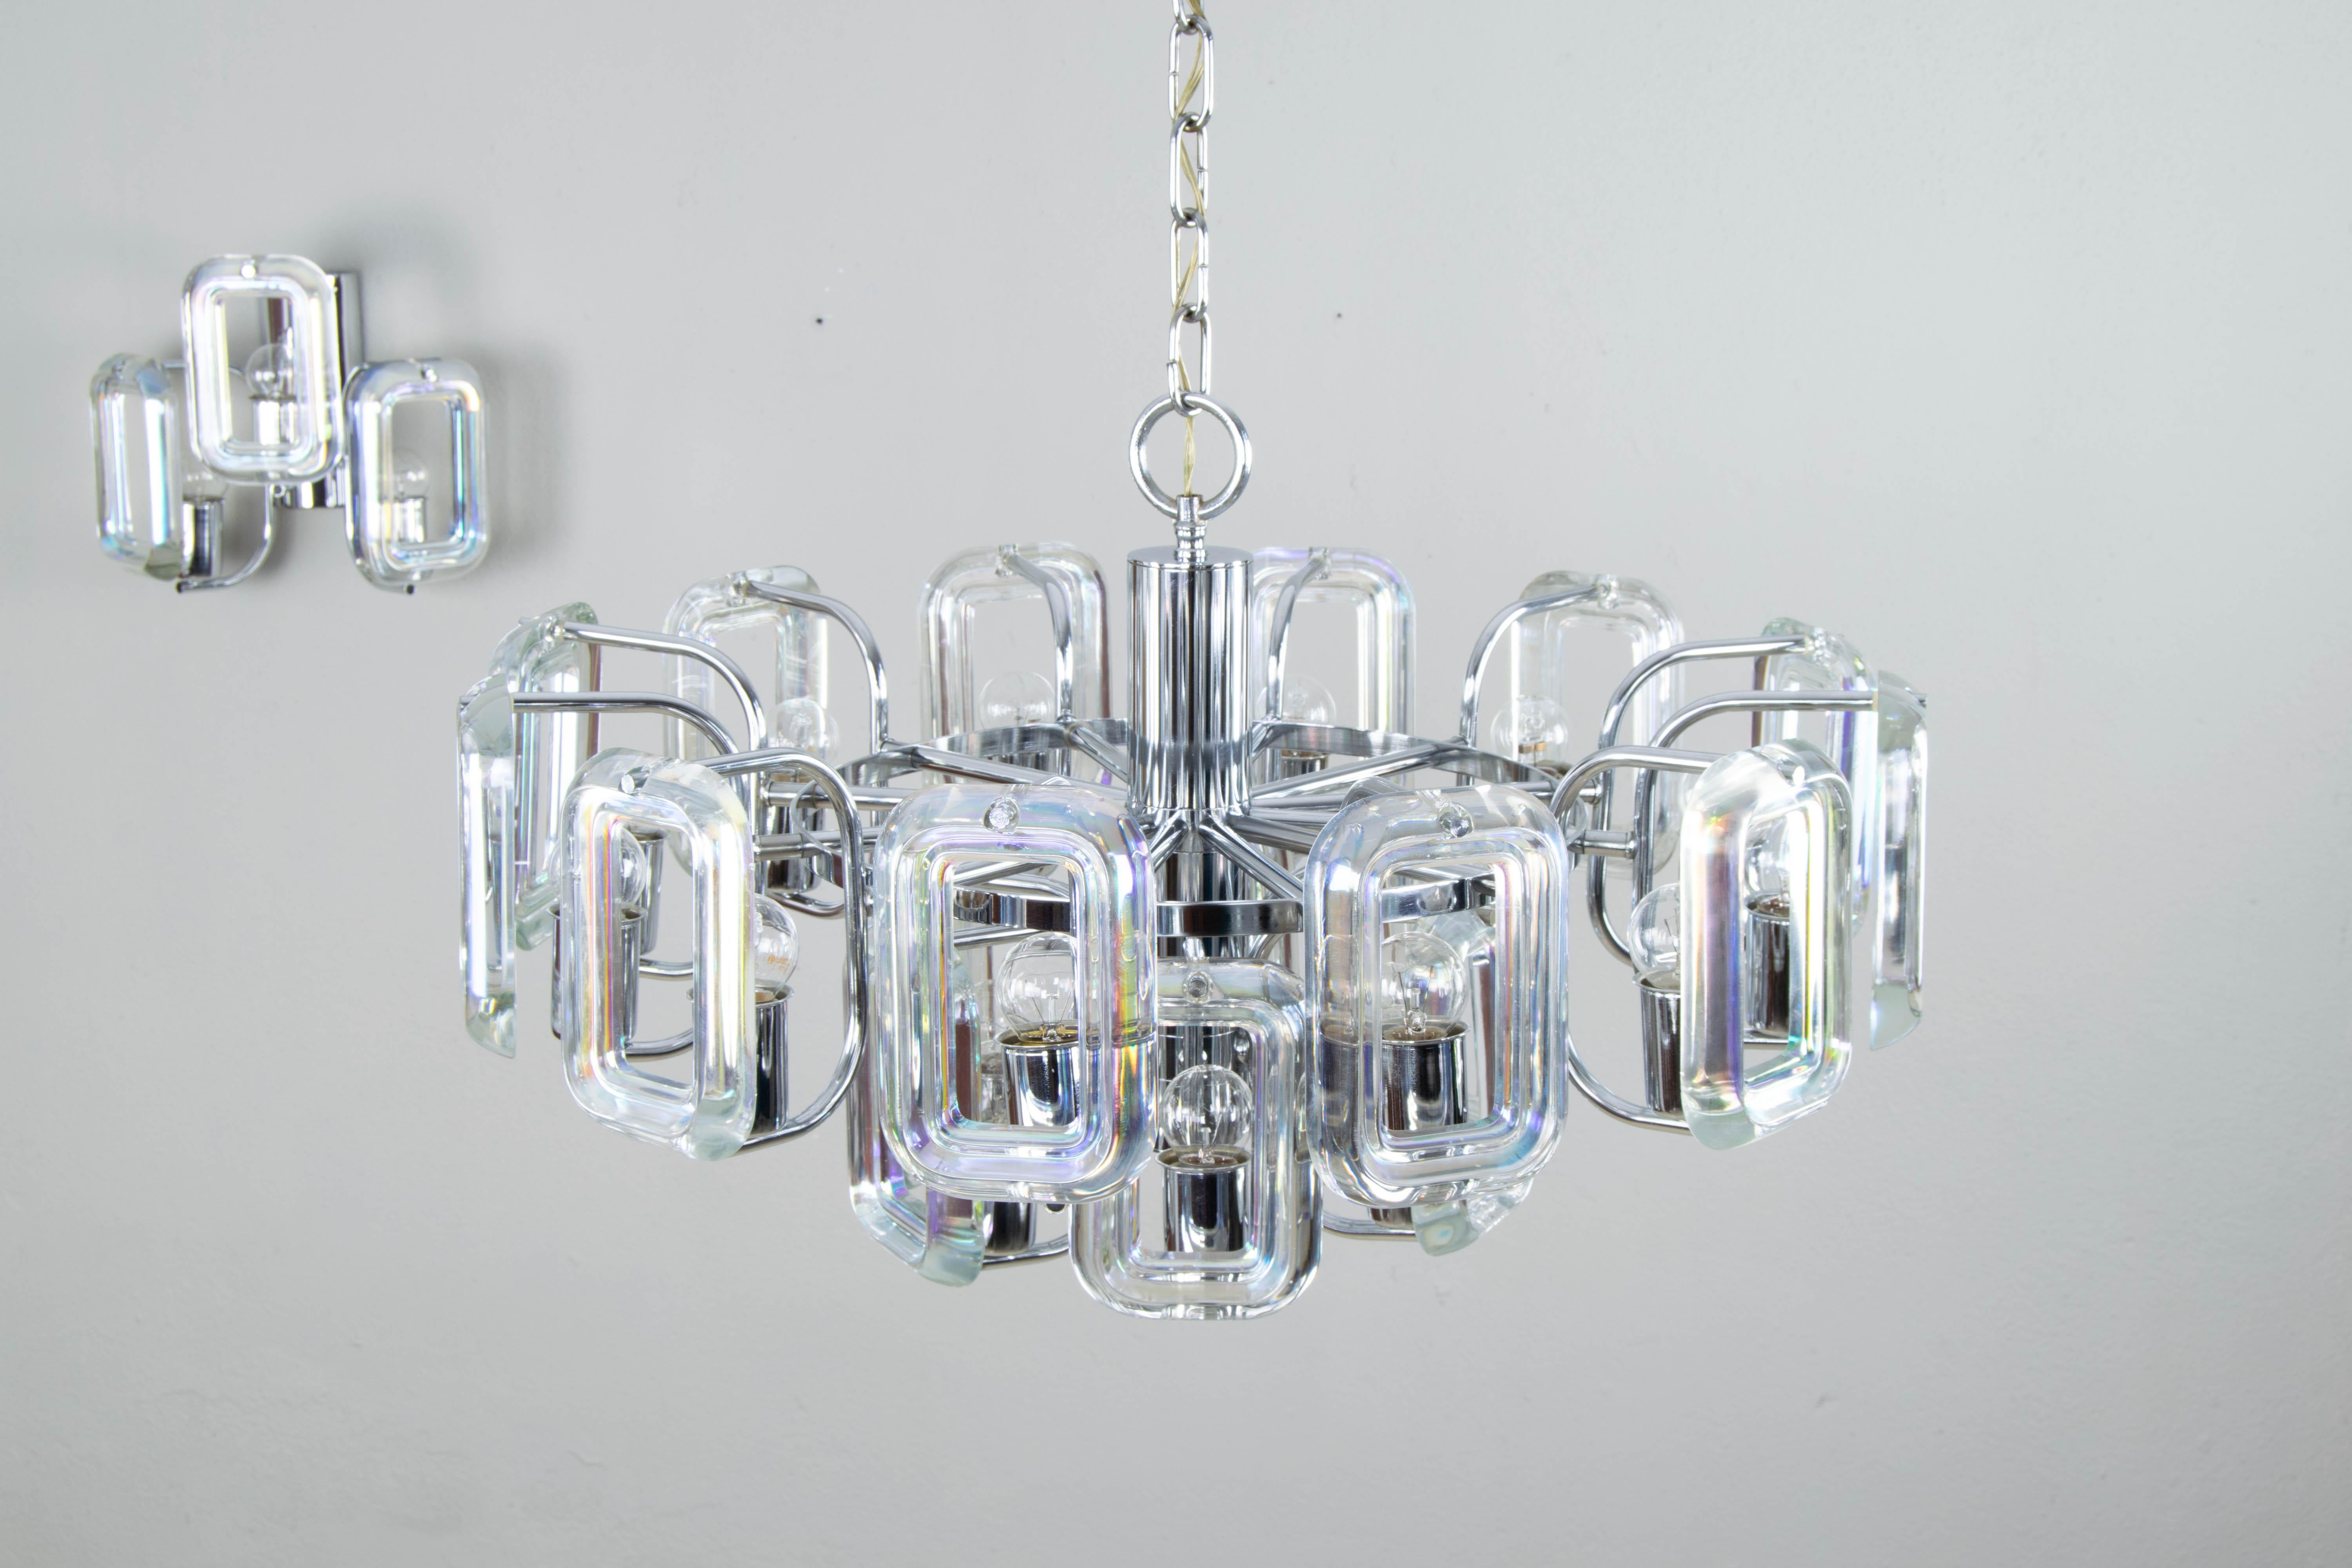 Steel Large Set of Chandelier and Sconces of Italian Modern Iridescent Glass Links